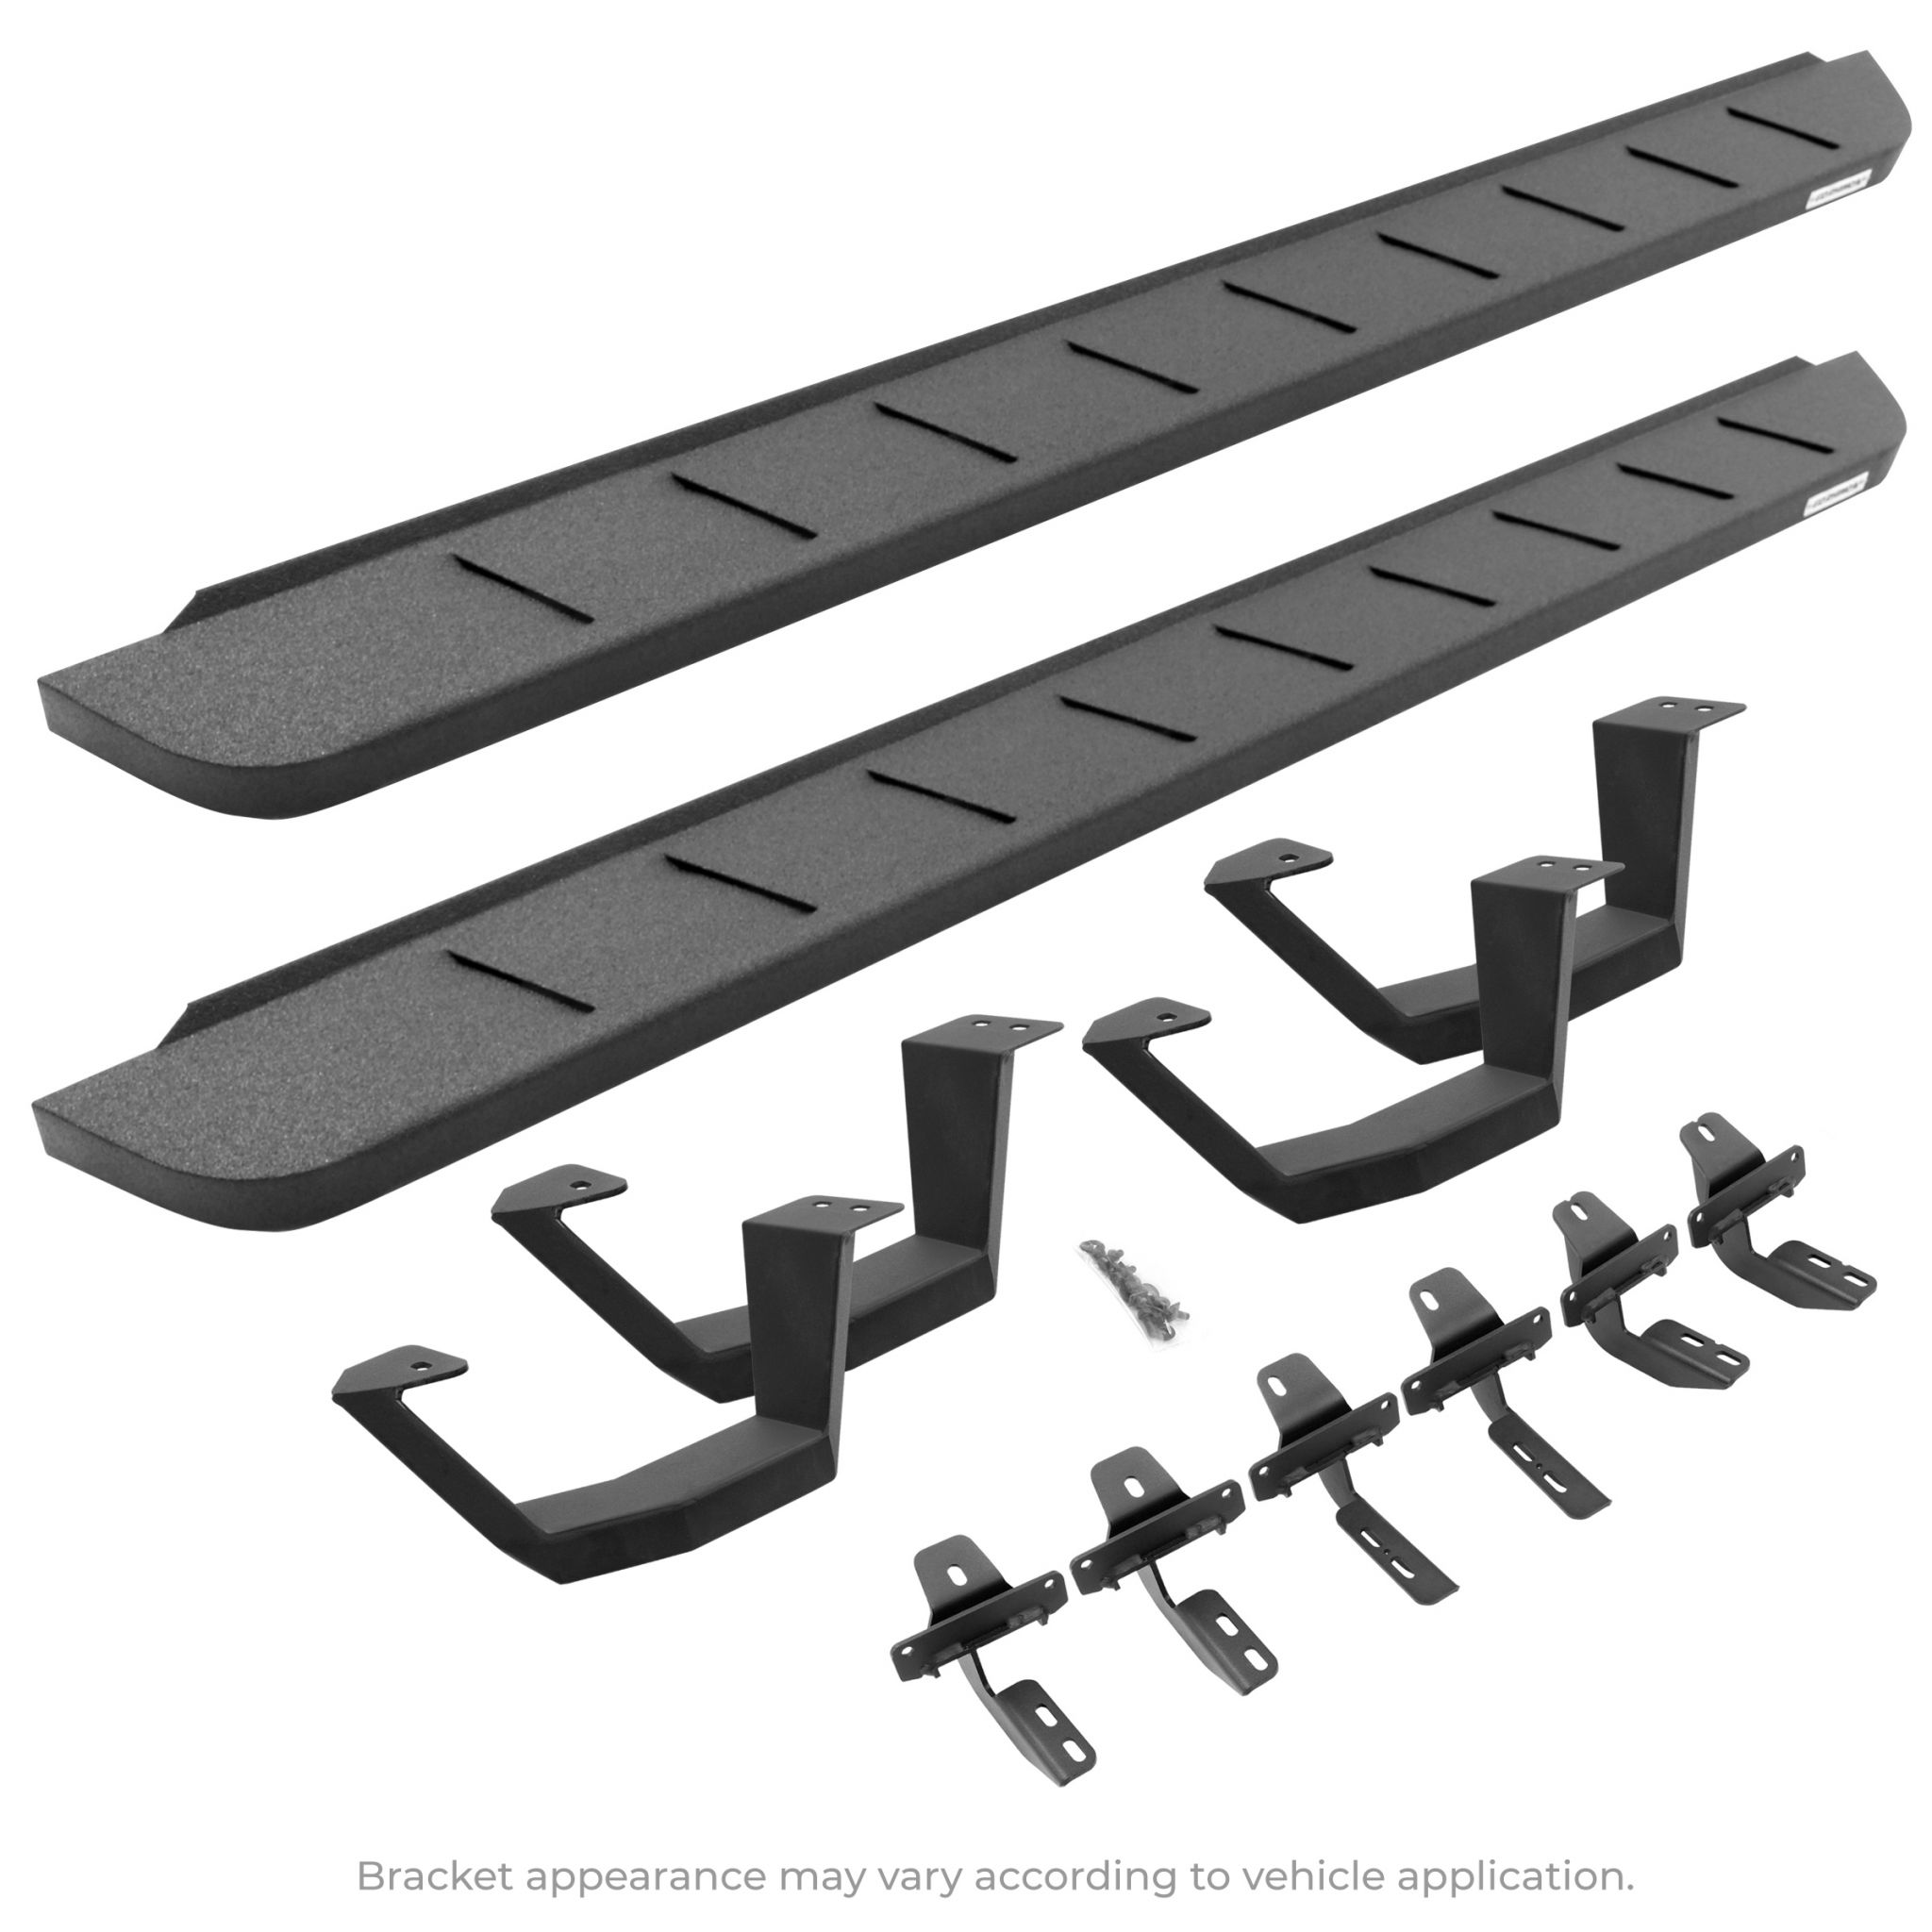 Go Rhino - 6340998020T - RB10 Running Boards With Mounting Brackets & 2 Pairs of Drop Steps Kit - Protective Bedliner Coating